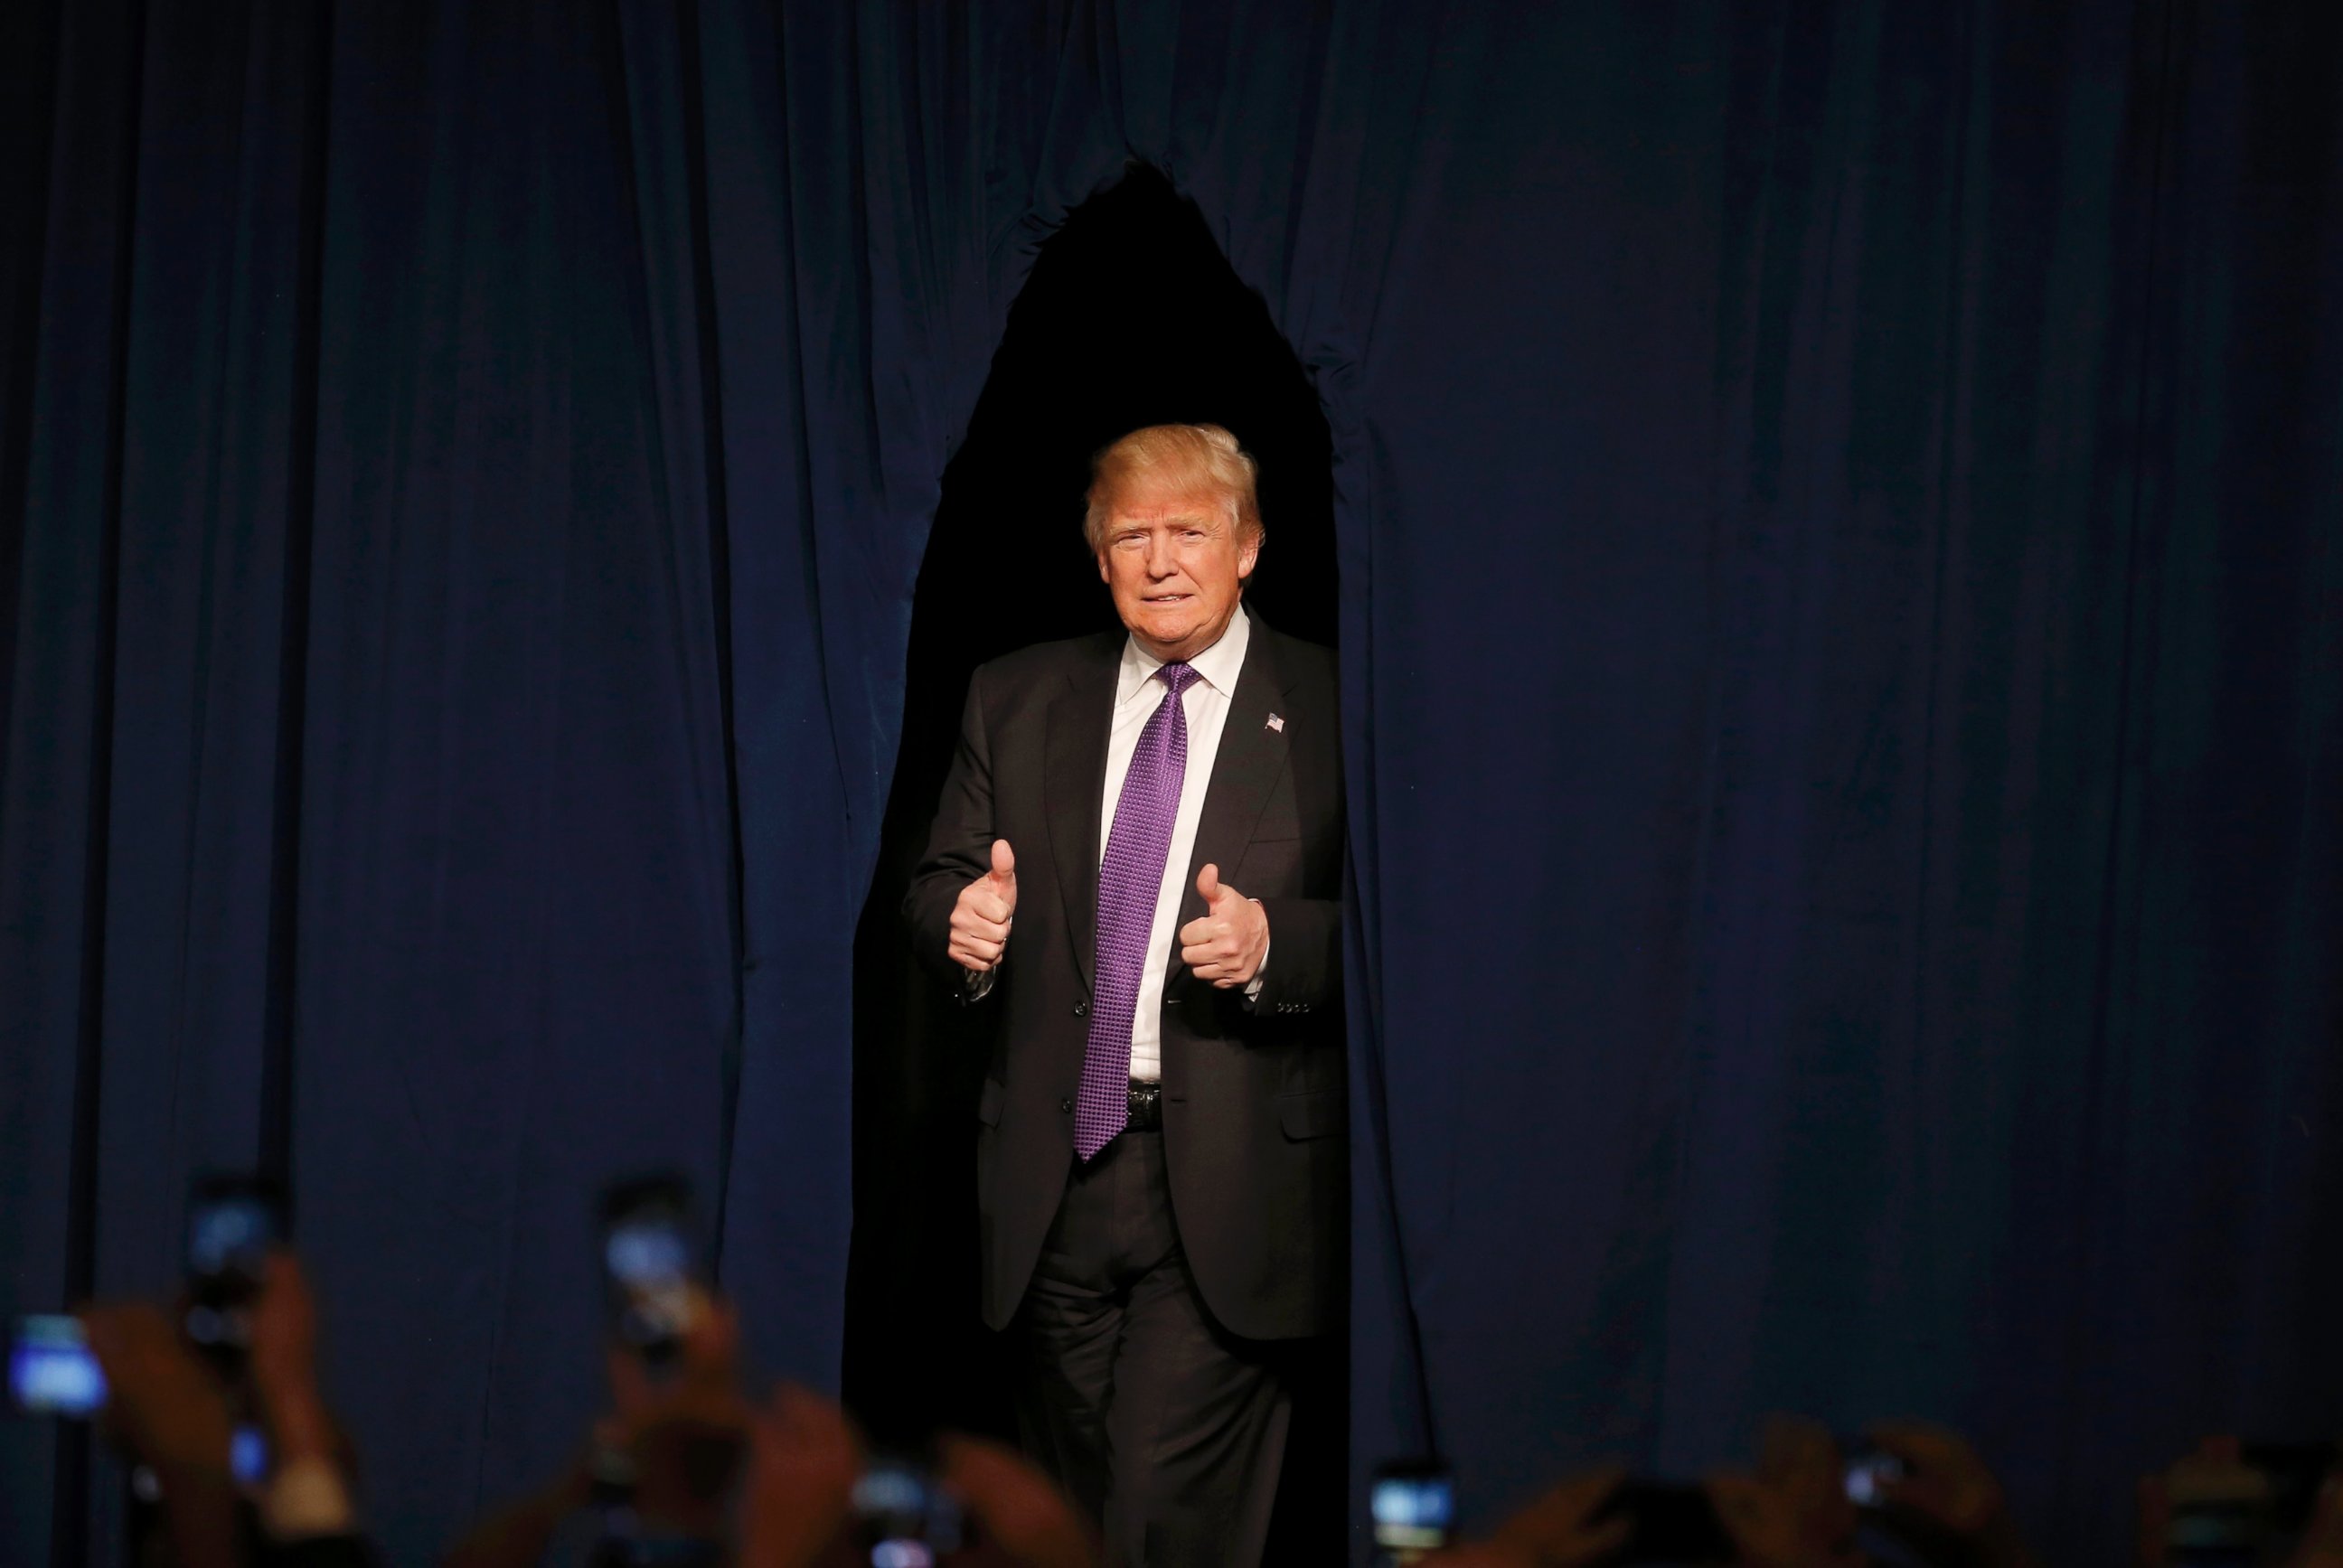 PHOTO: Republican presidential candidate Donald Trump arrives to address supporters after being declared by the television networks as the winner in the Nevada Republican caucuses at his caucus night rally in Las Vegas, Feb. 23, 2016.